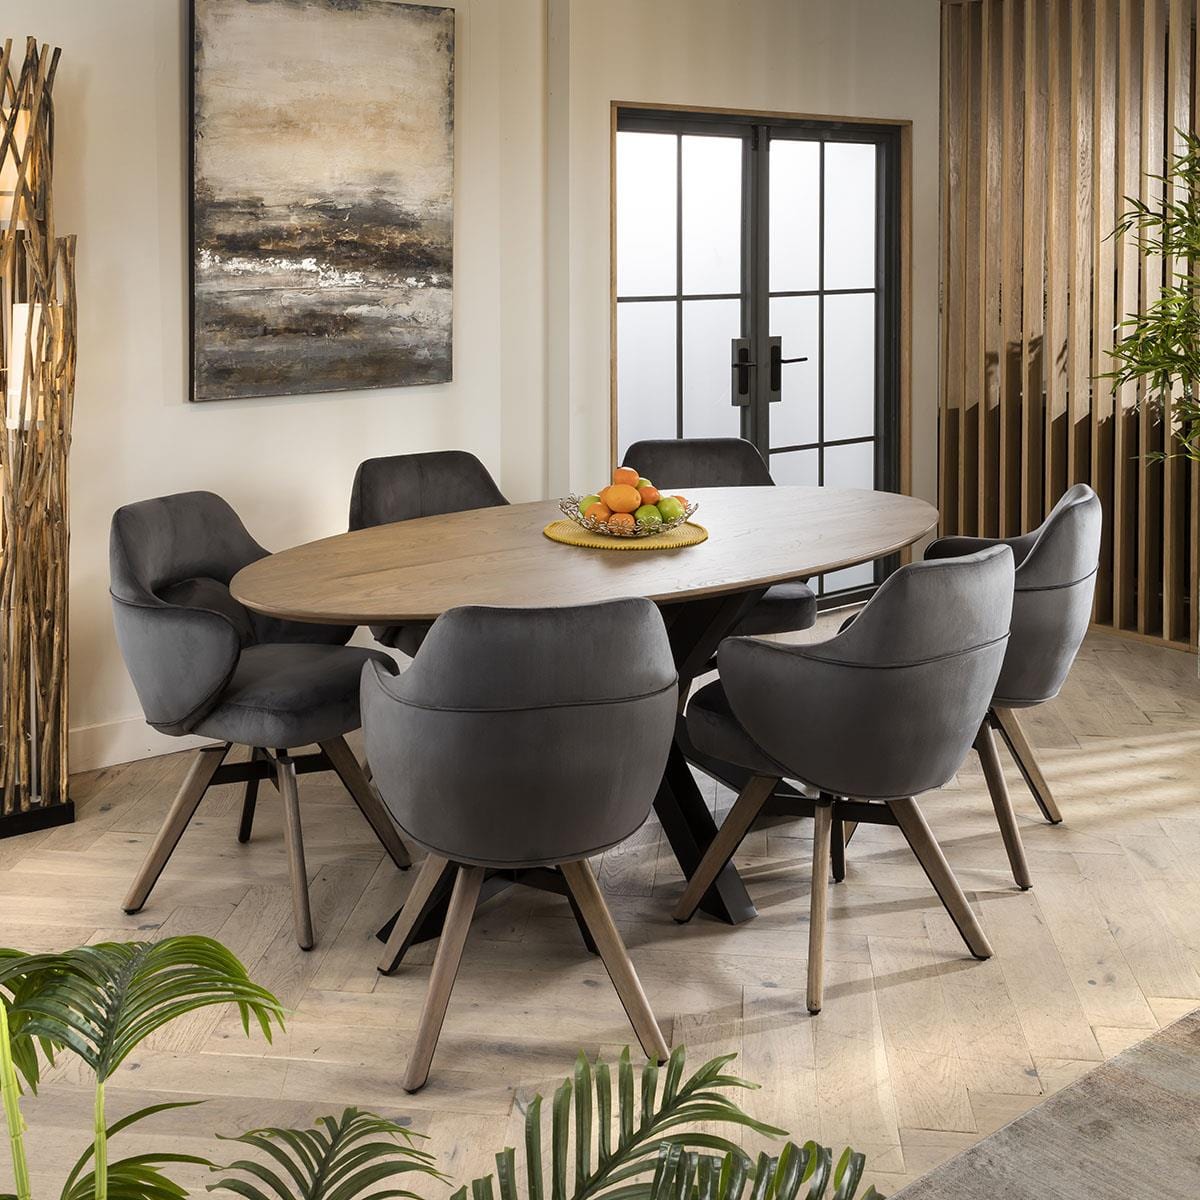 Quatropi Maeve Solid Wood Stained Oval Dining Table And 6 Chairs Set Grey